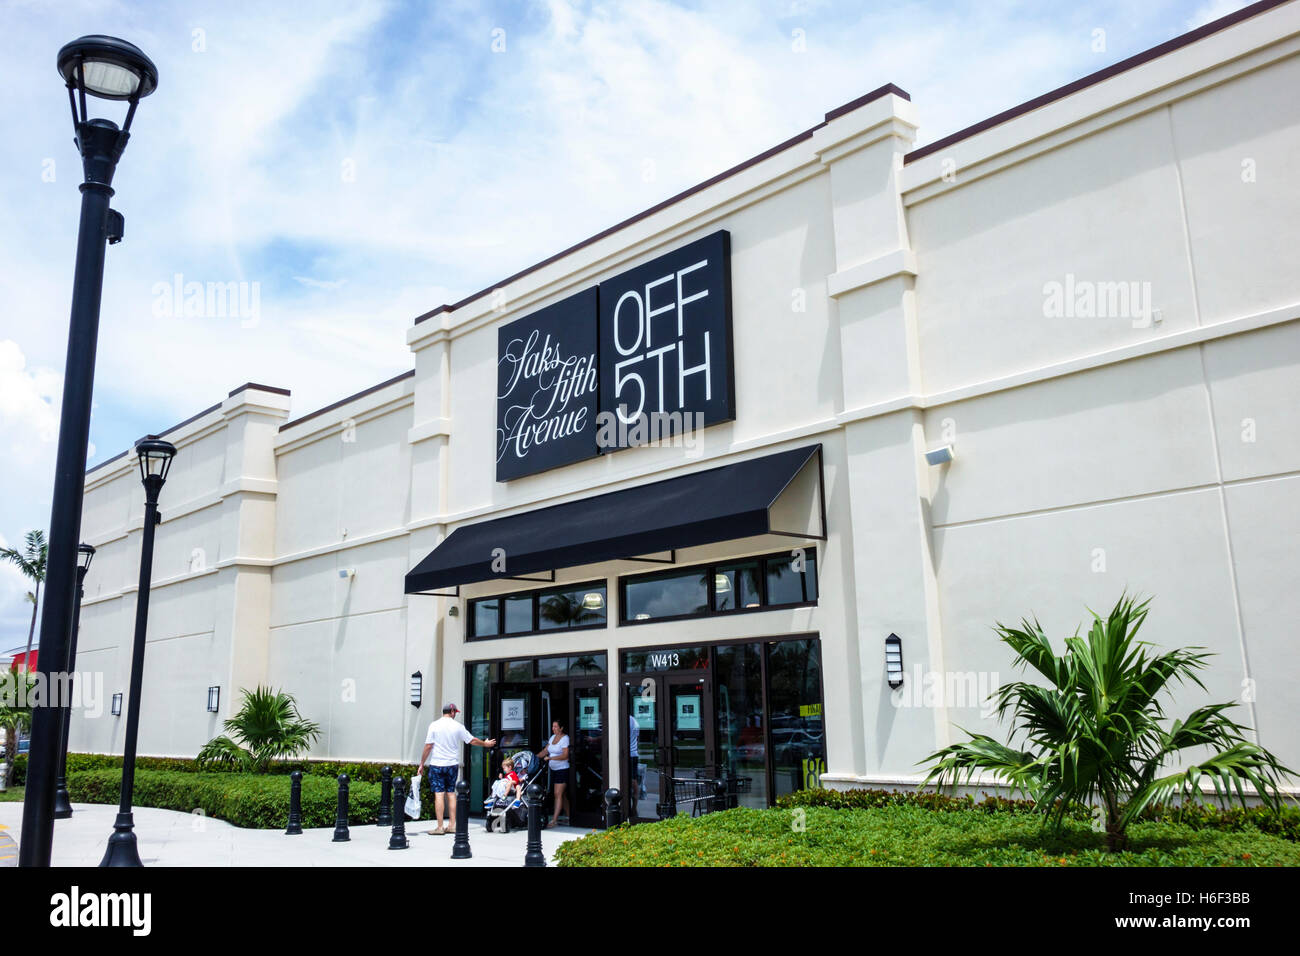 Palm Beach Florida Outlets Shopping Saks Fifth Avenue Off 5th